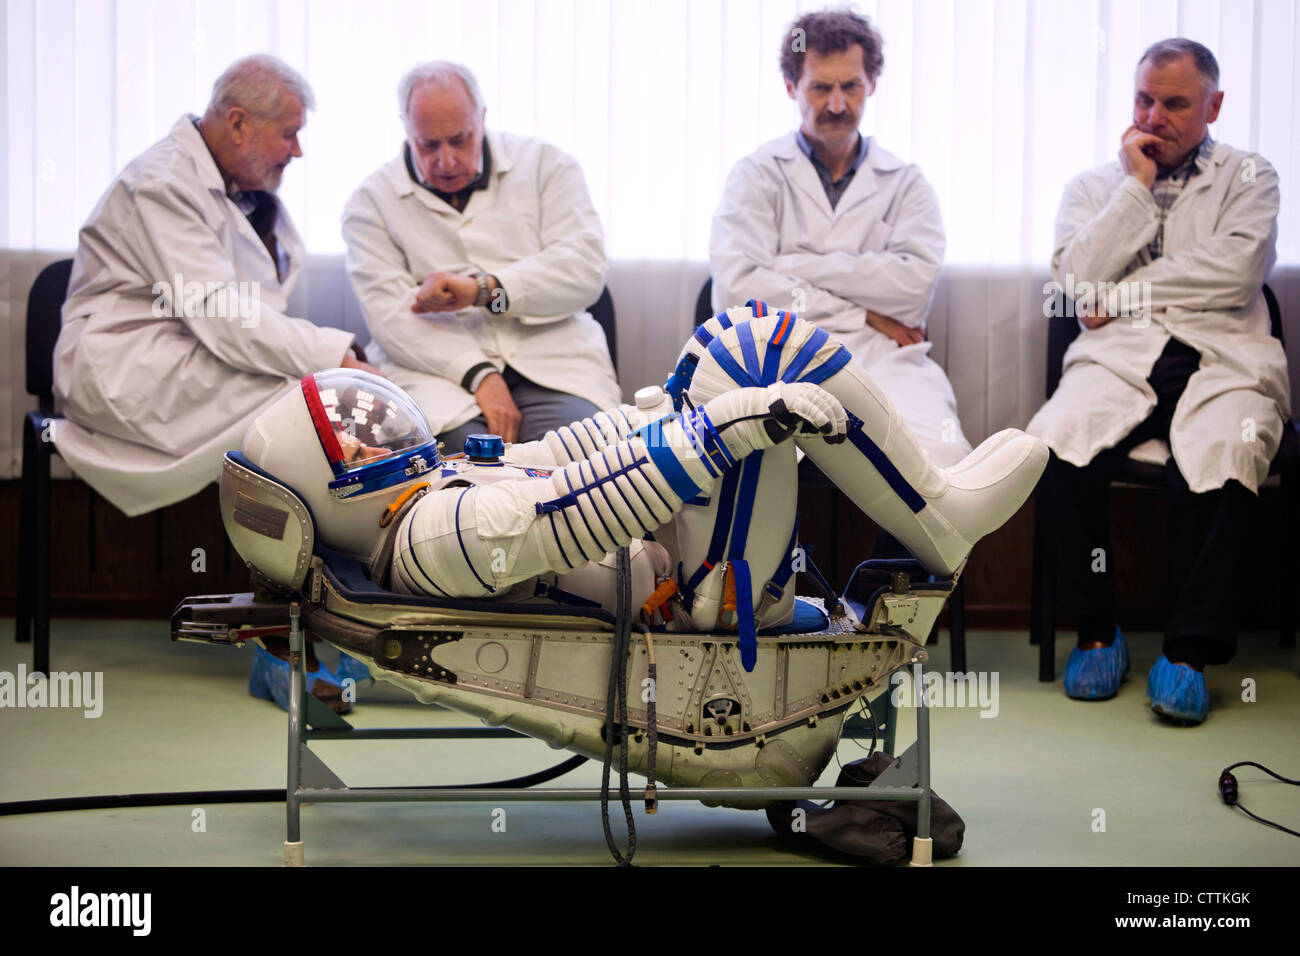 NASA astronaut Rex Walheim (foreground), STS-135 mission specialist, undergoes a fit check of his Sokol spacesuit March 28, 2011 at the Zvezda facility in Moscow. The crew of the final shuttle mission traveled to Moscow for a suit fit check of their Russian Sokol suits that will be required in the event of an emergency. Stock Photo